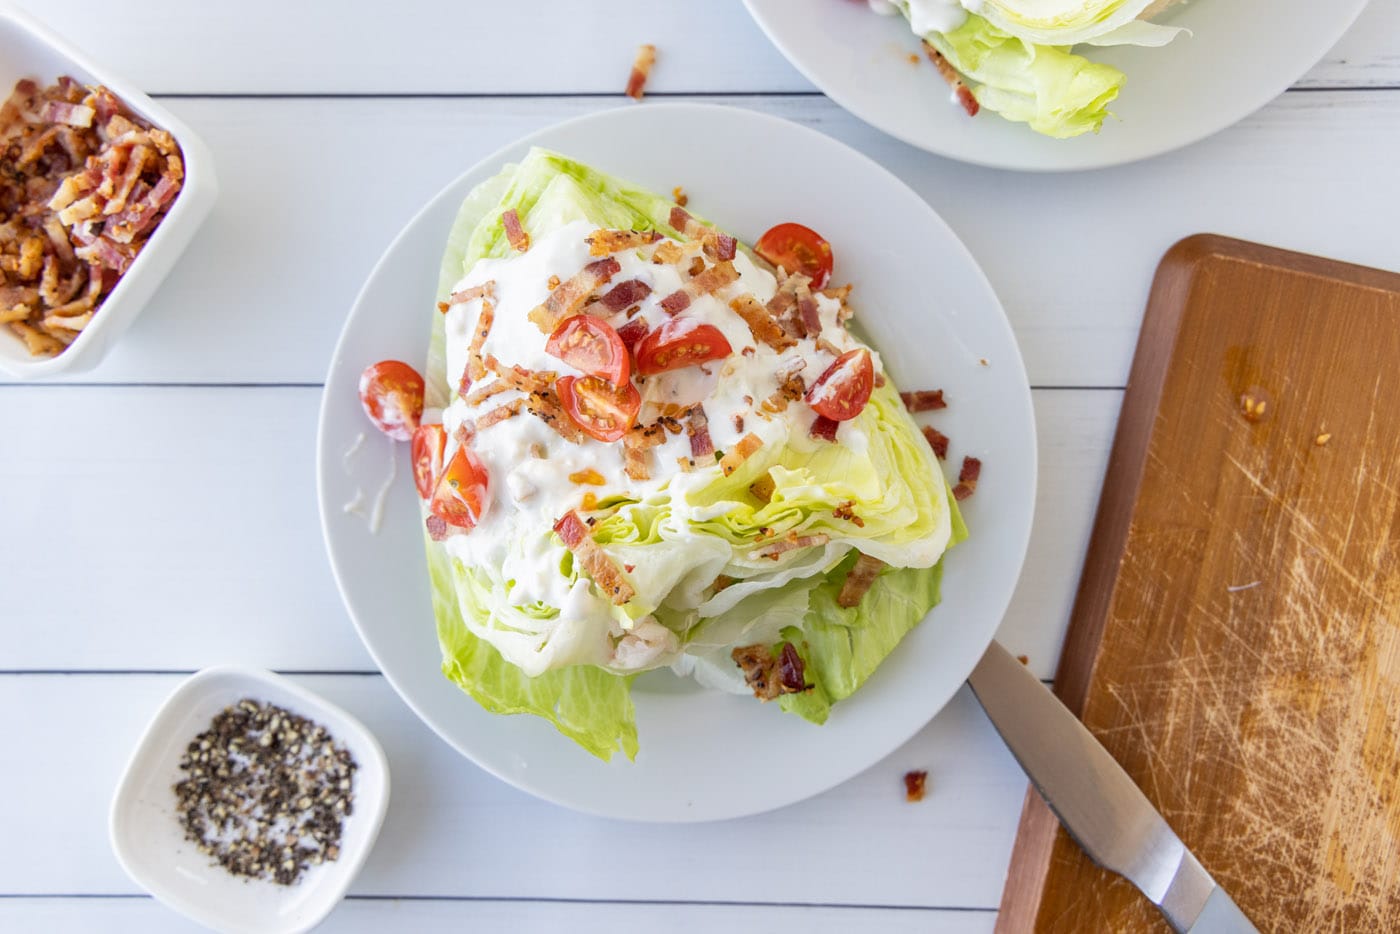 cherry tomatoes, bacon, and bleu cheese dressing on iceberg lettuce